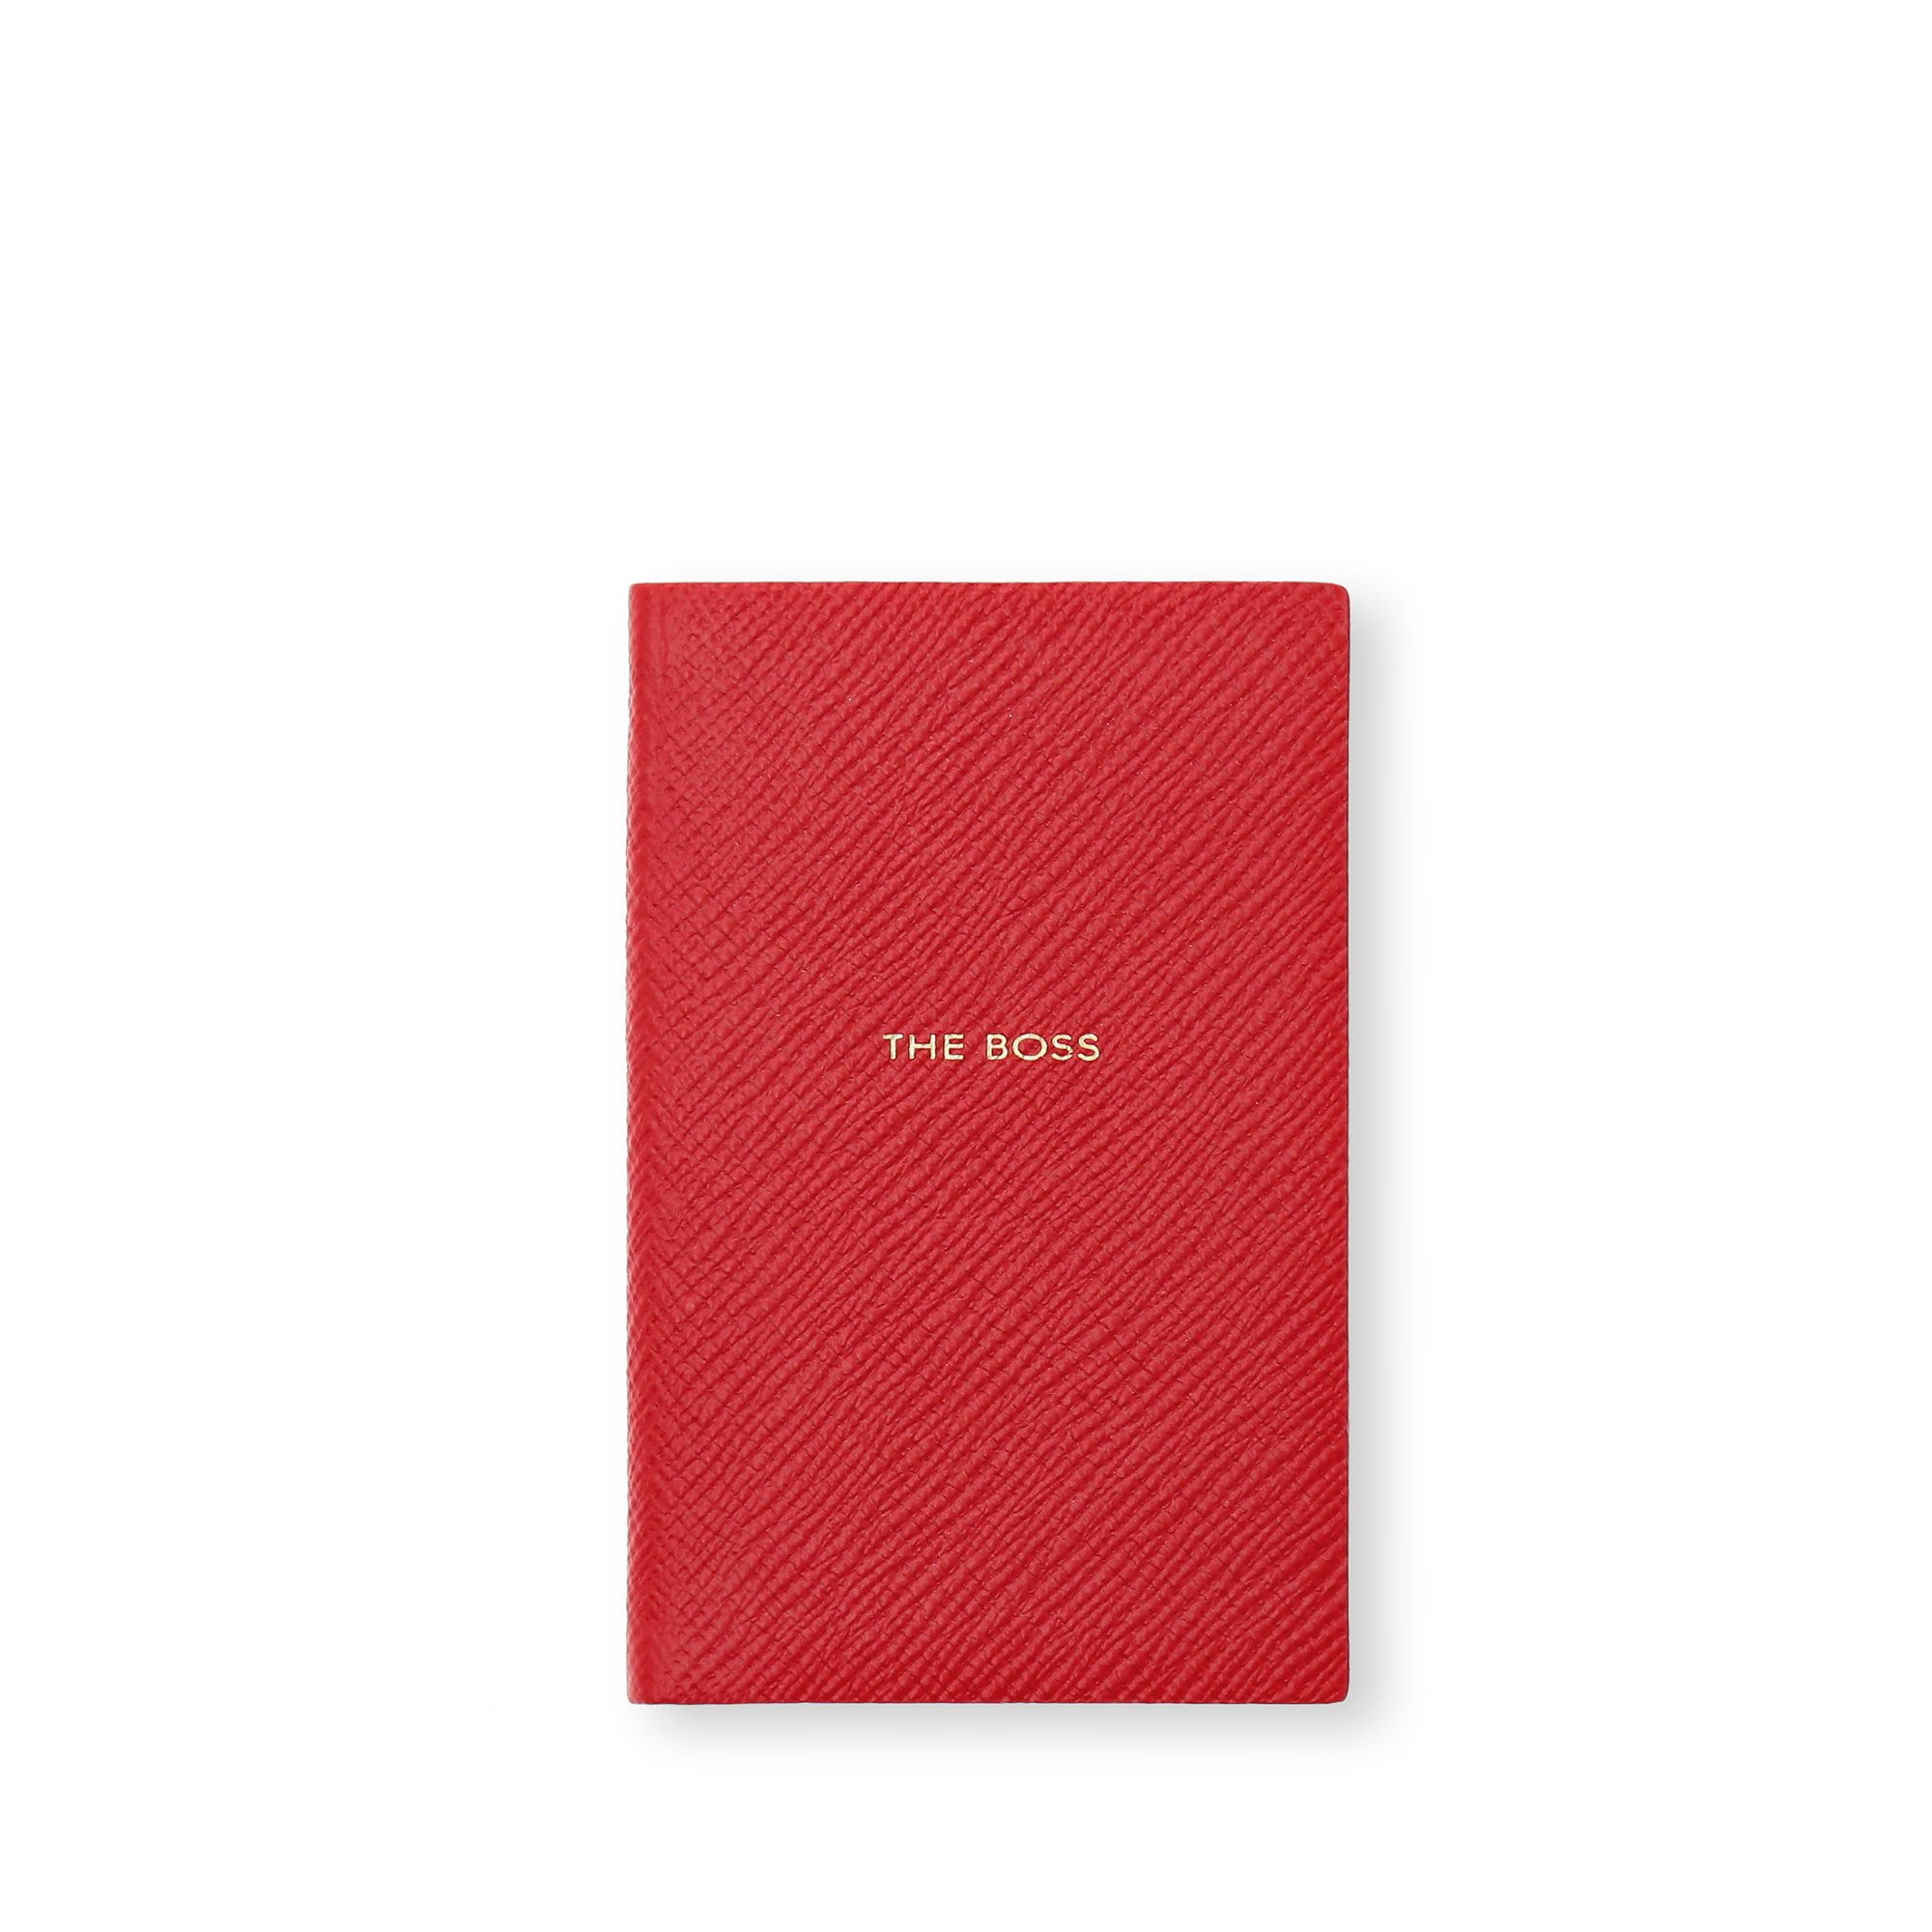 The Boss Wafer Notebook in Panama in scarlet red | Smythson